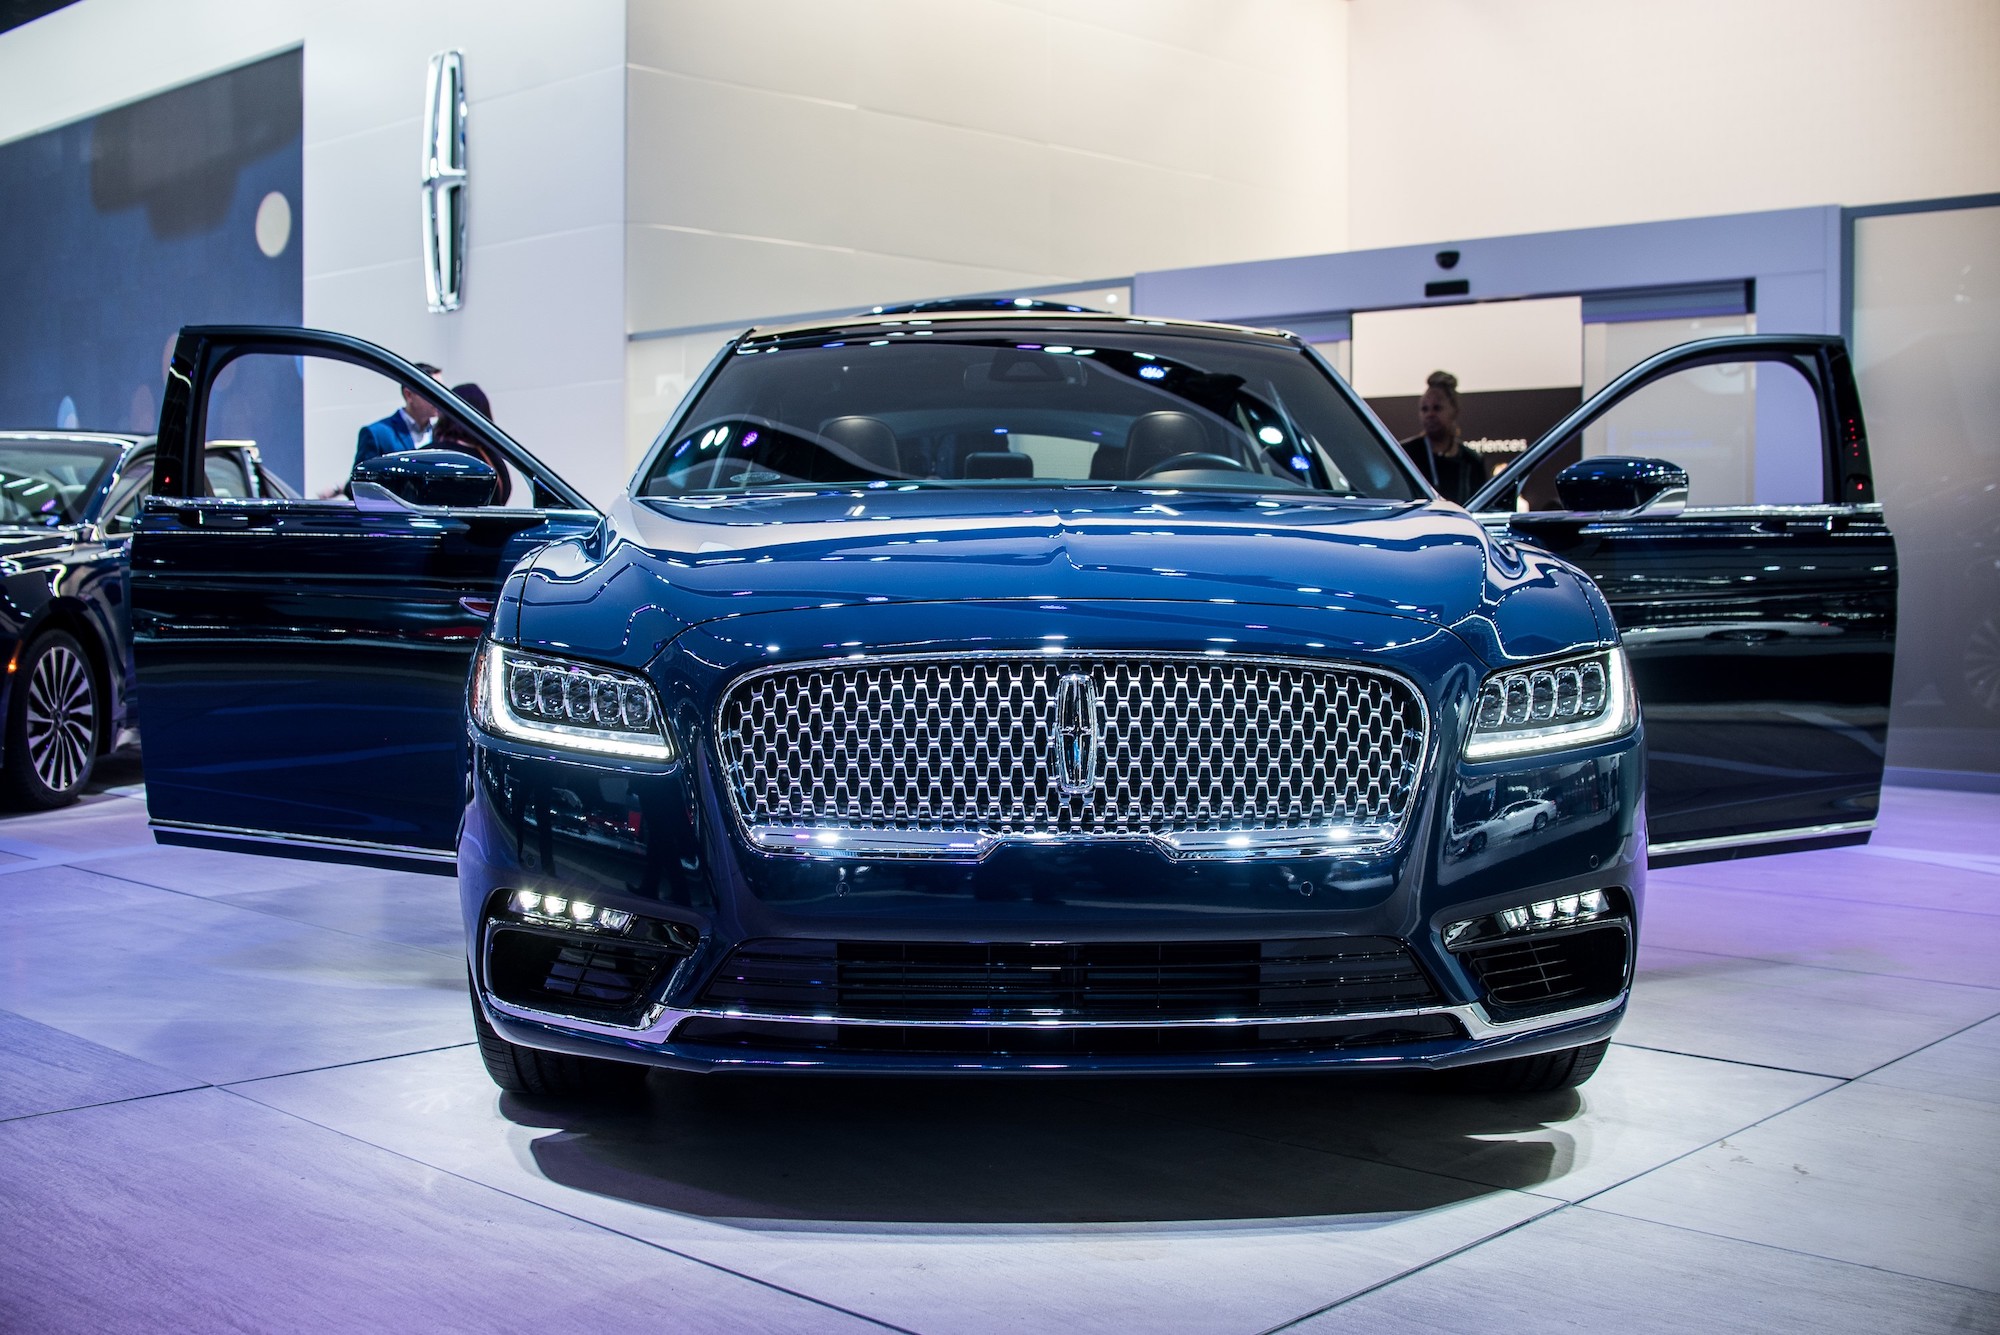 Lincoln MKZ is on display during North American International Auto Show at Cobo Center